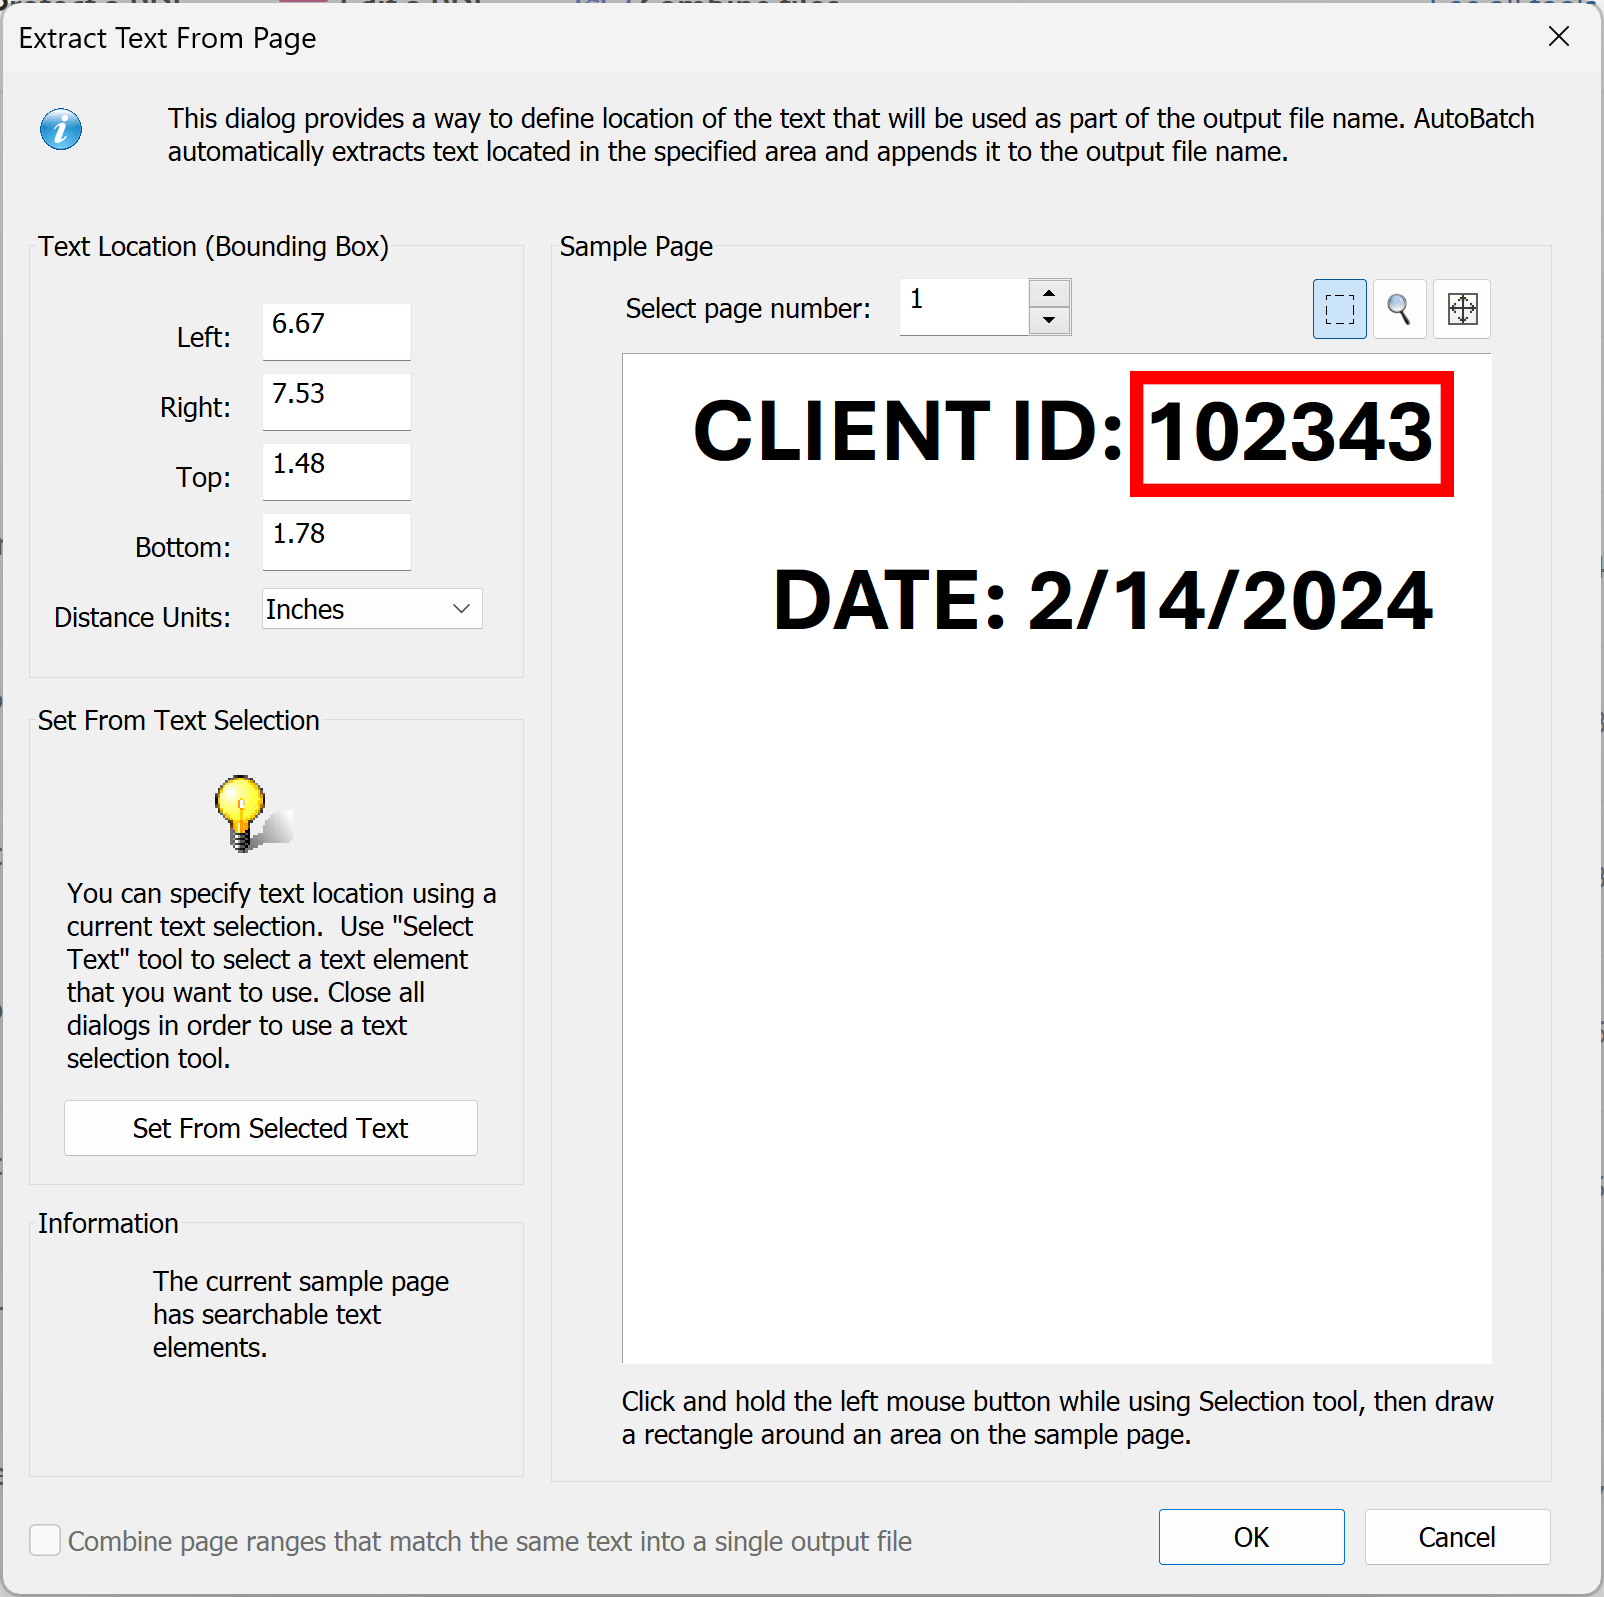 Select an area around client ID